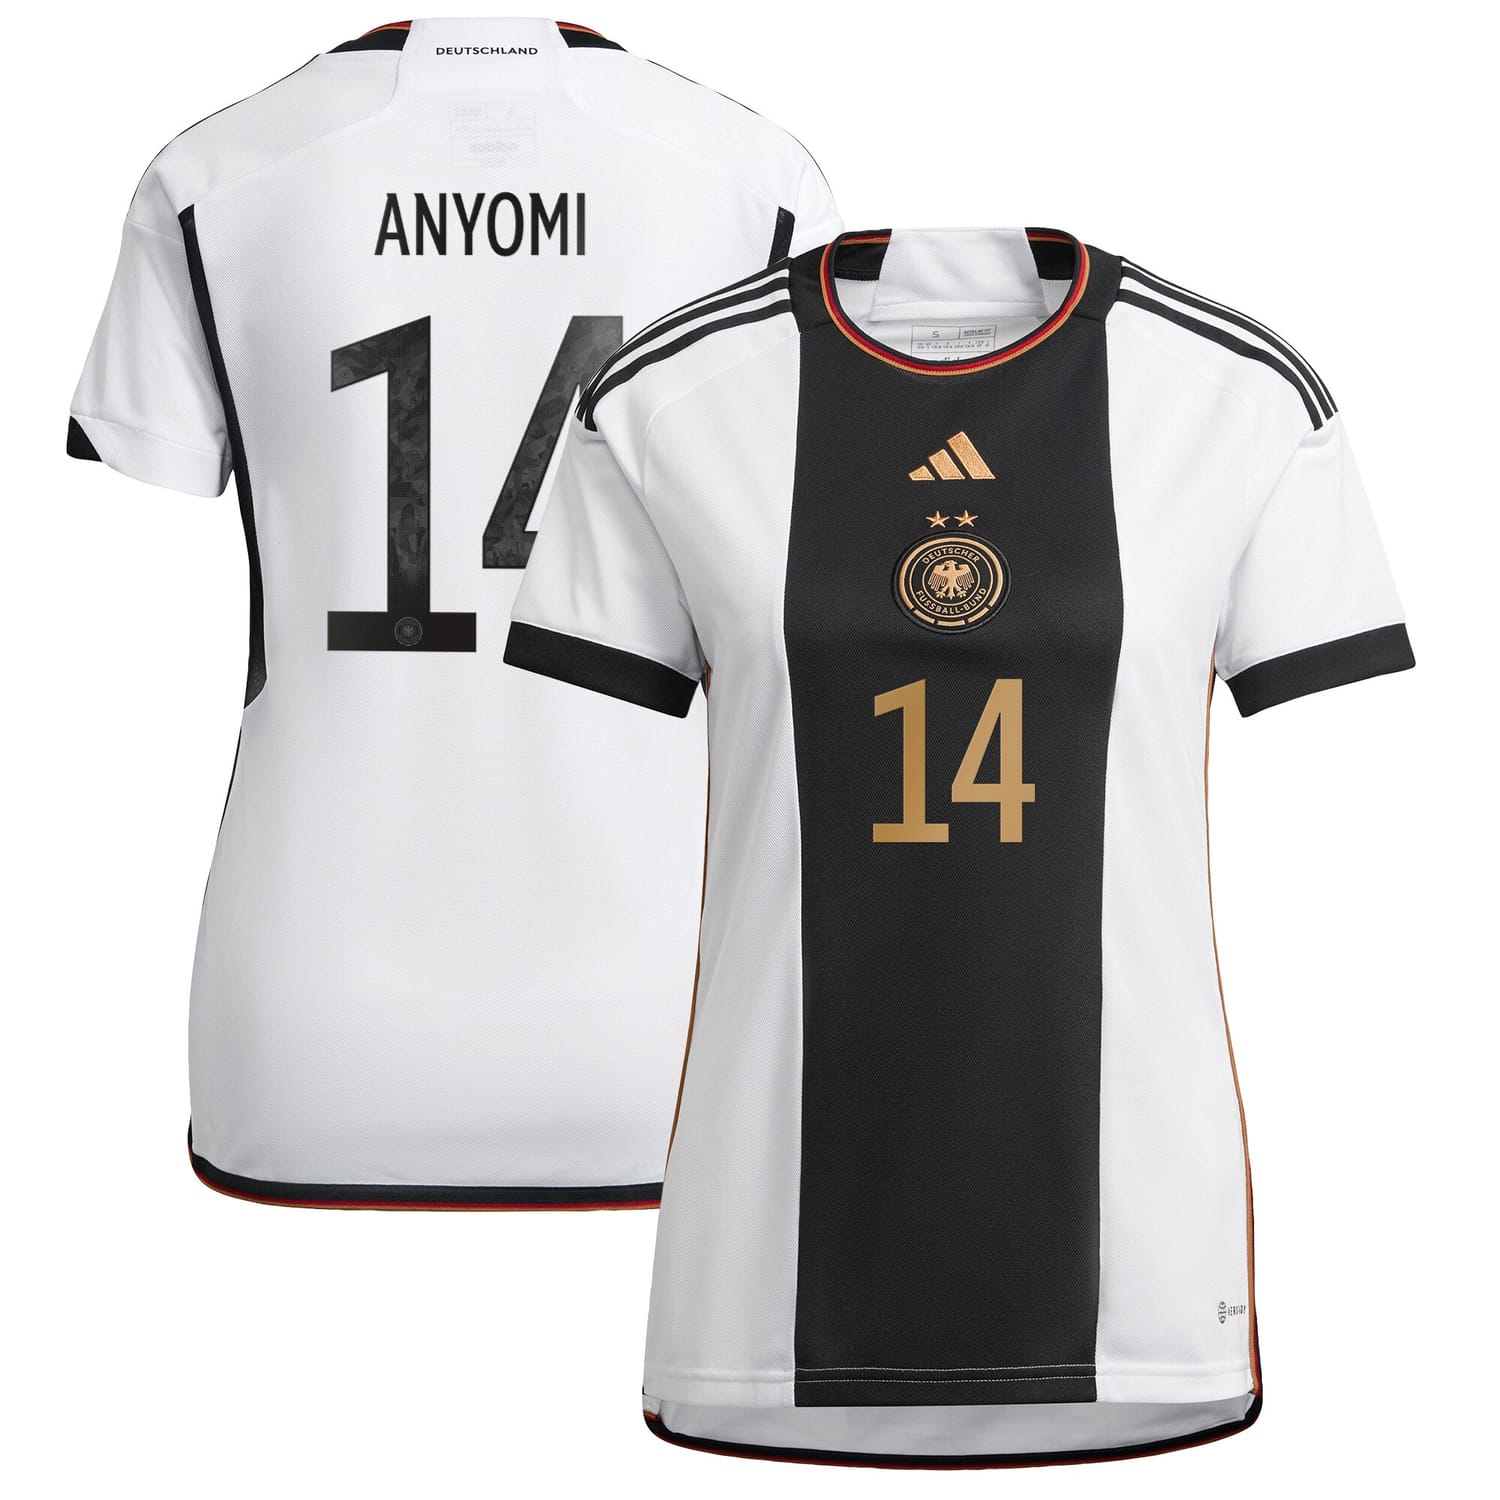 Germany National Team Home Jersey Shirt player Nicole Anyomi 14 printing for Women